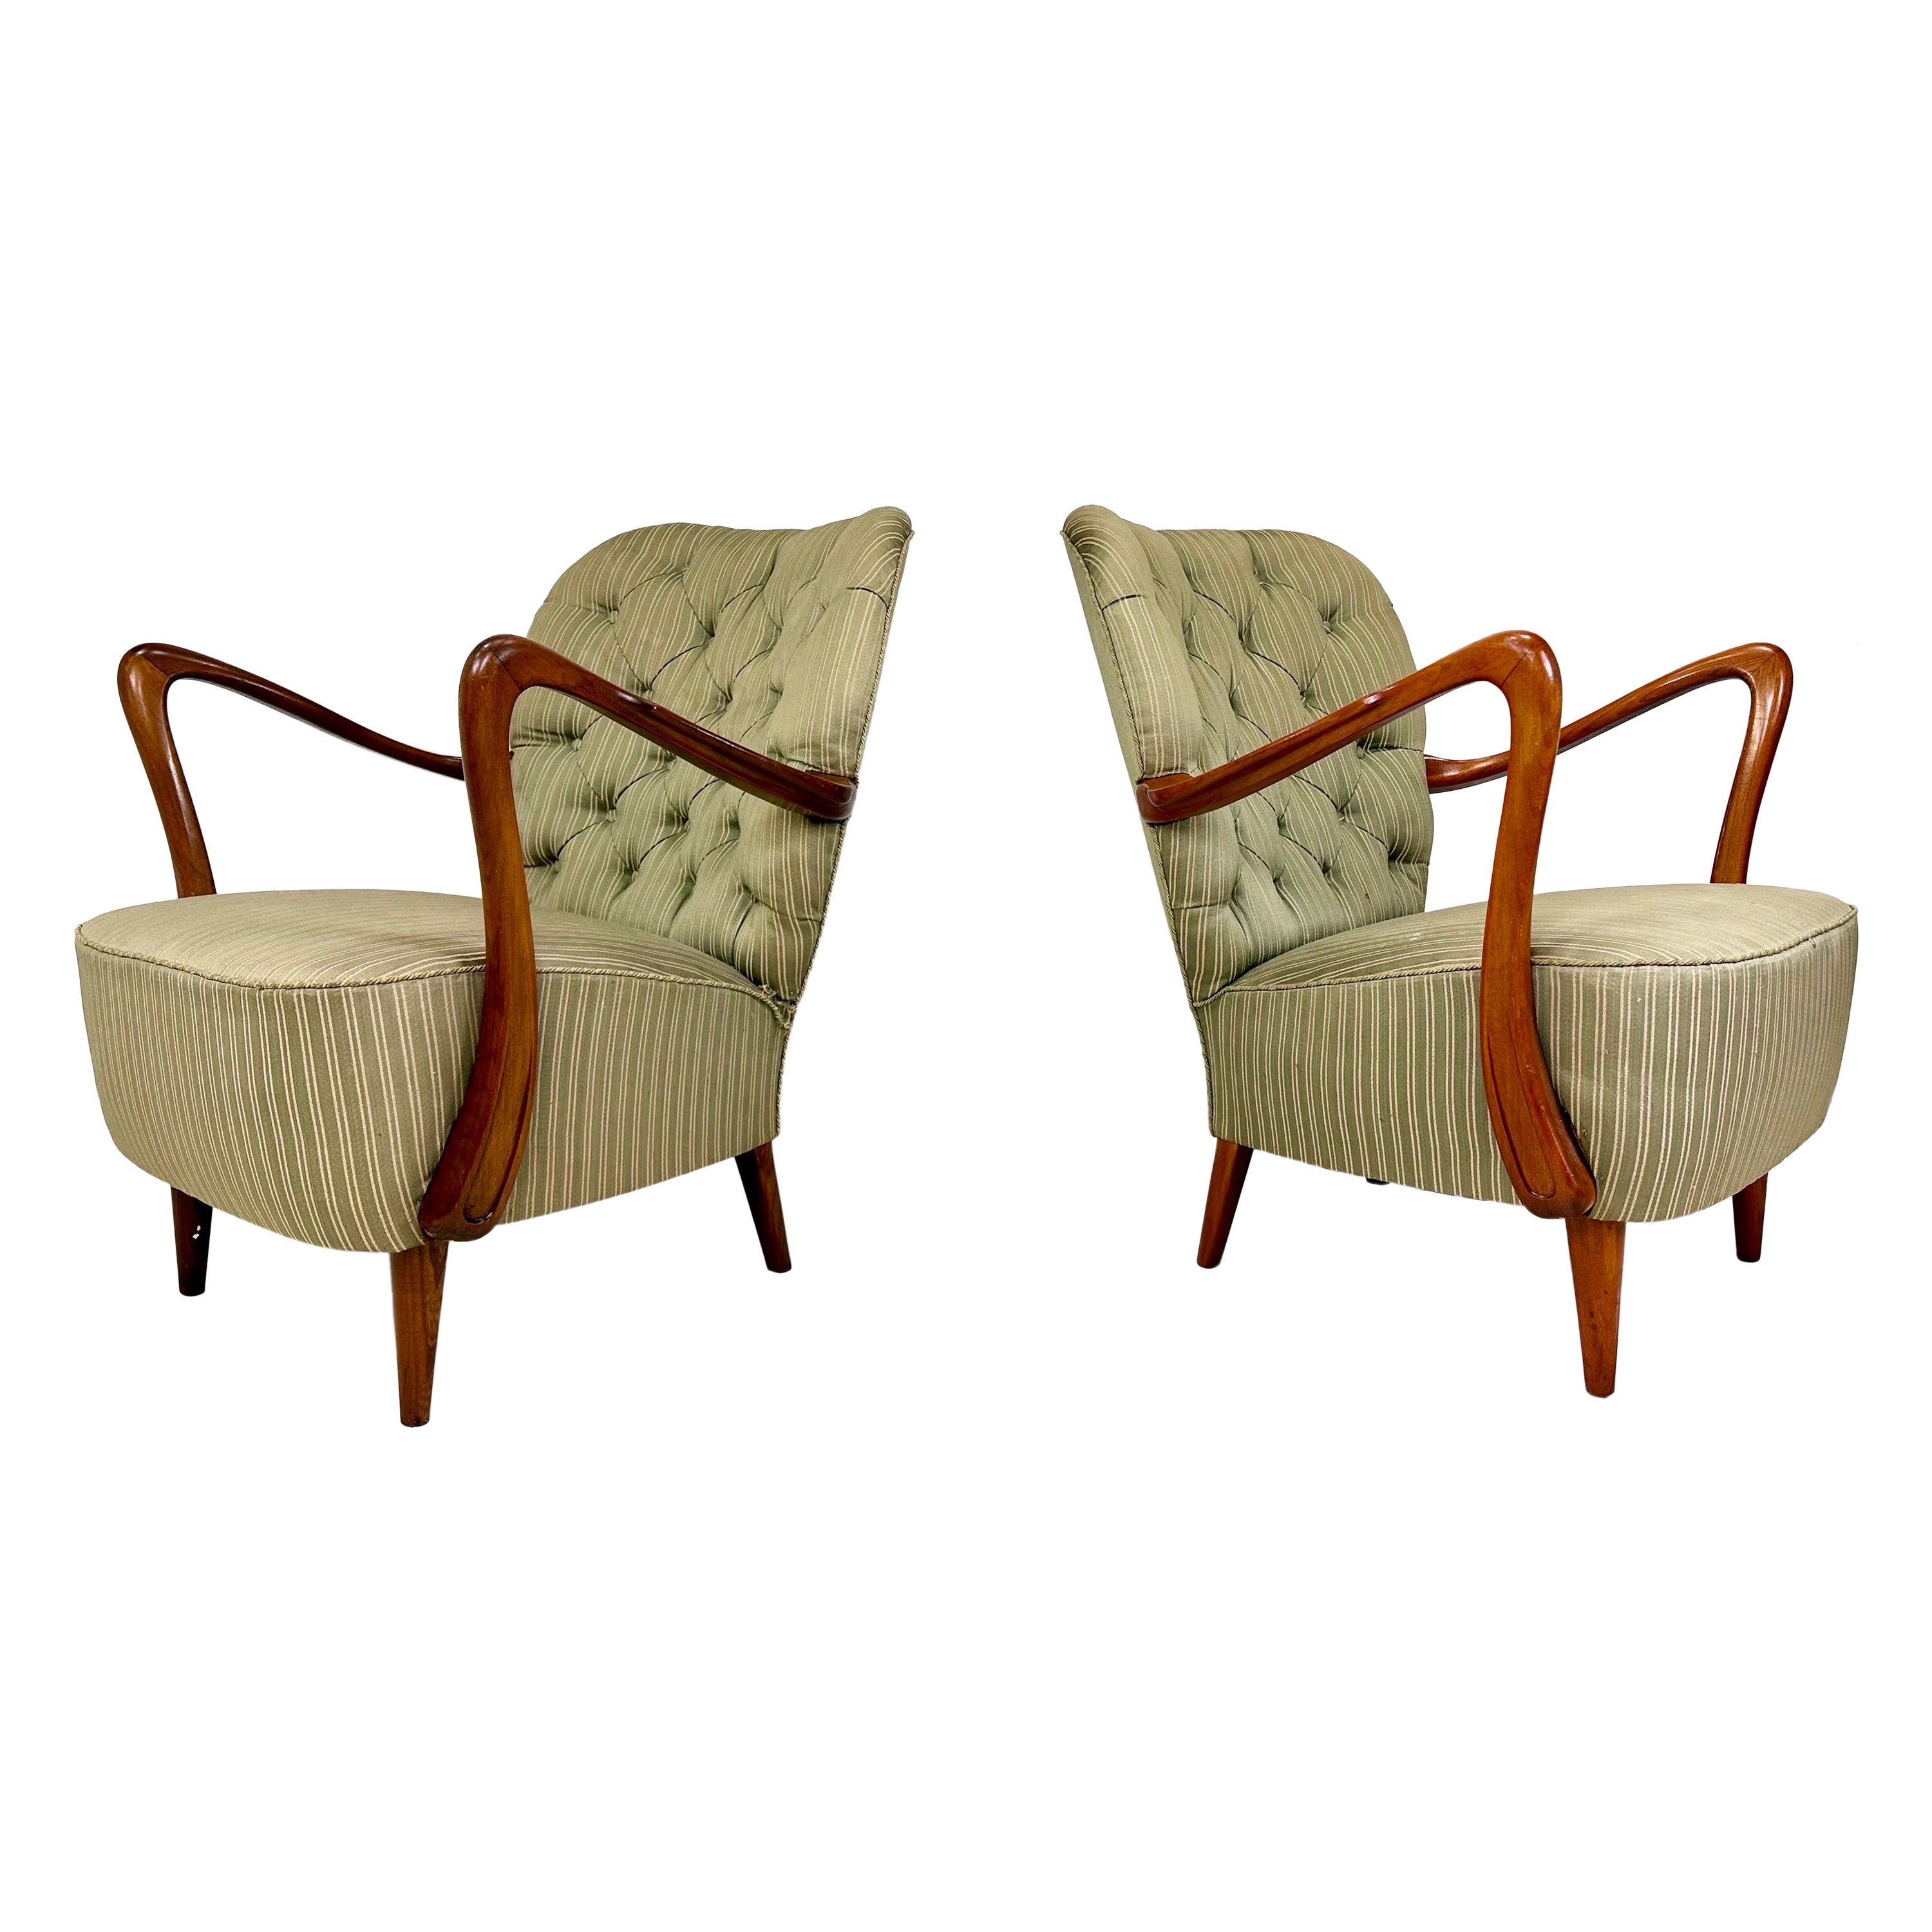 Pair of 1940’s Swedish Lounge Chairs For Sale